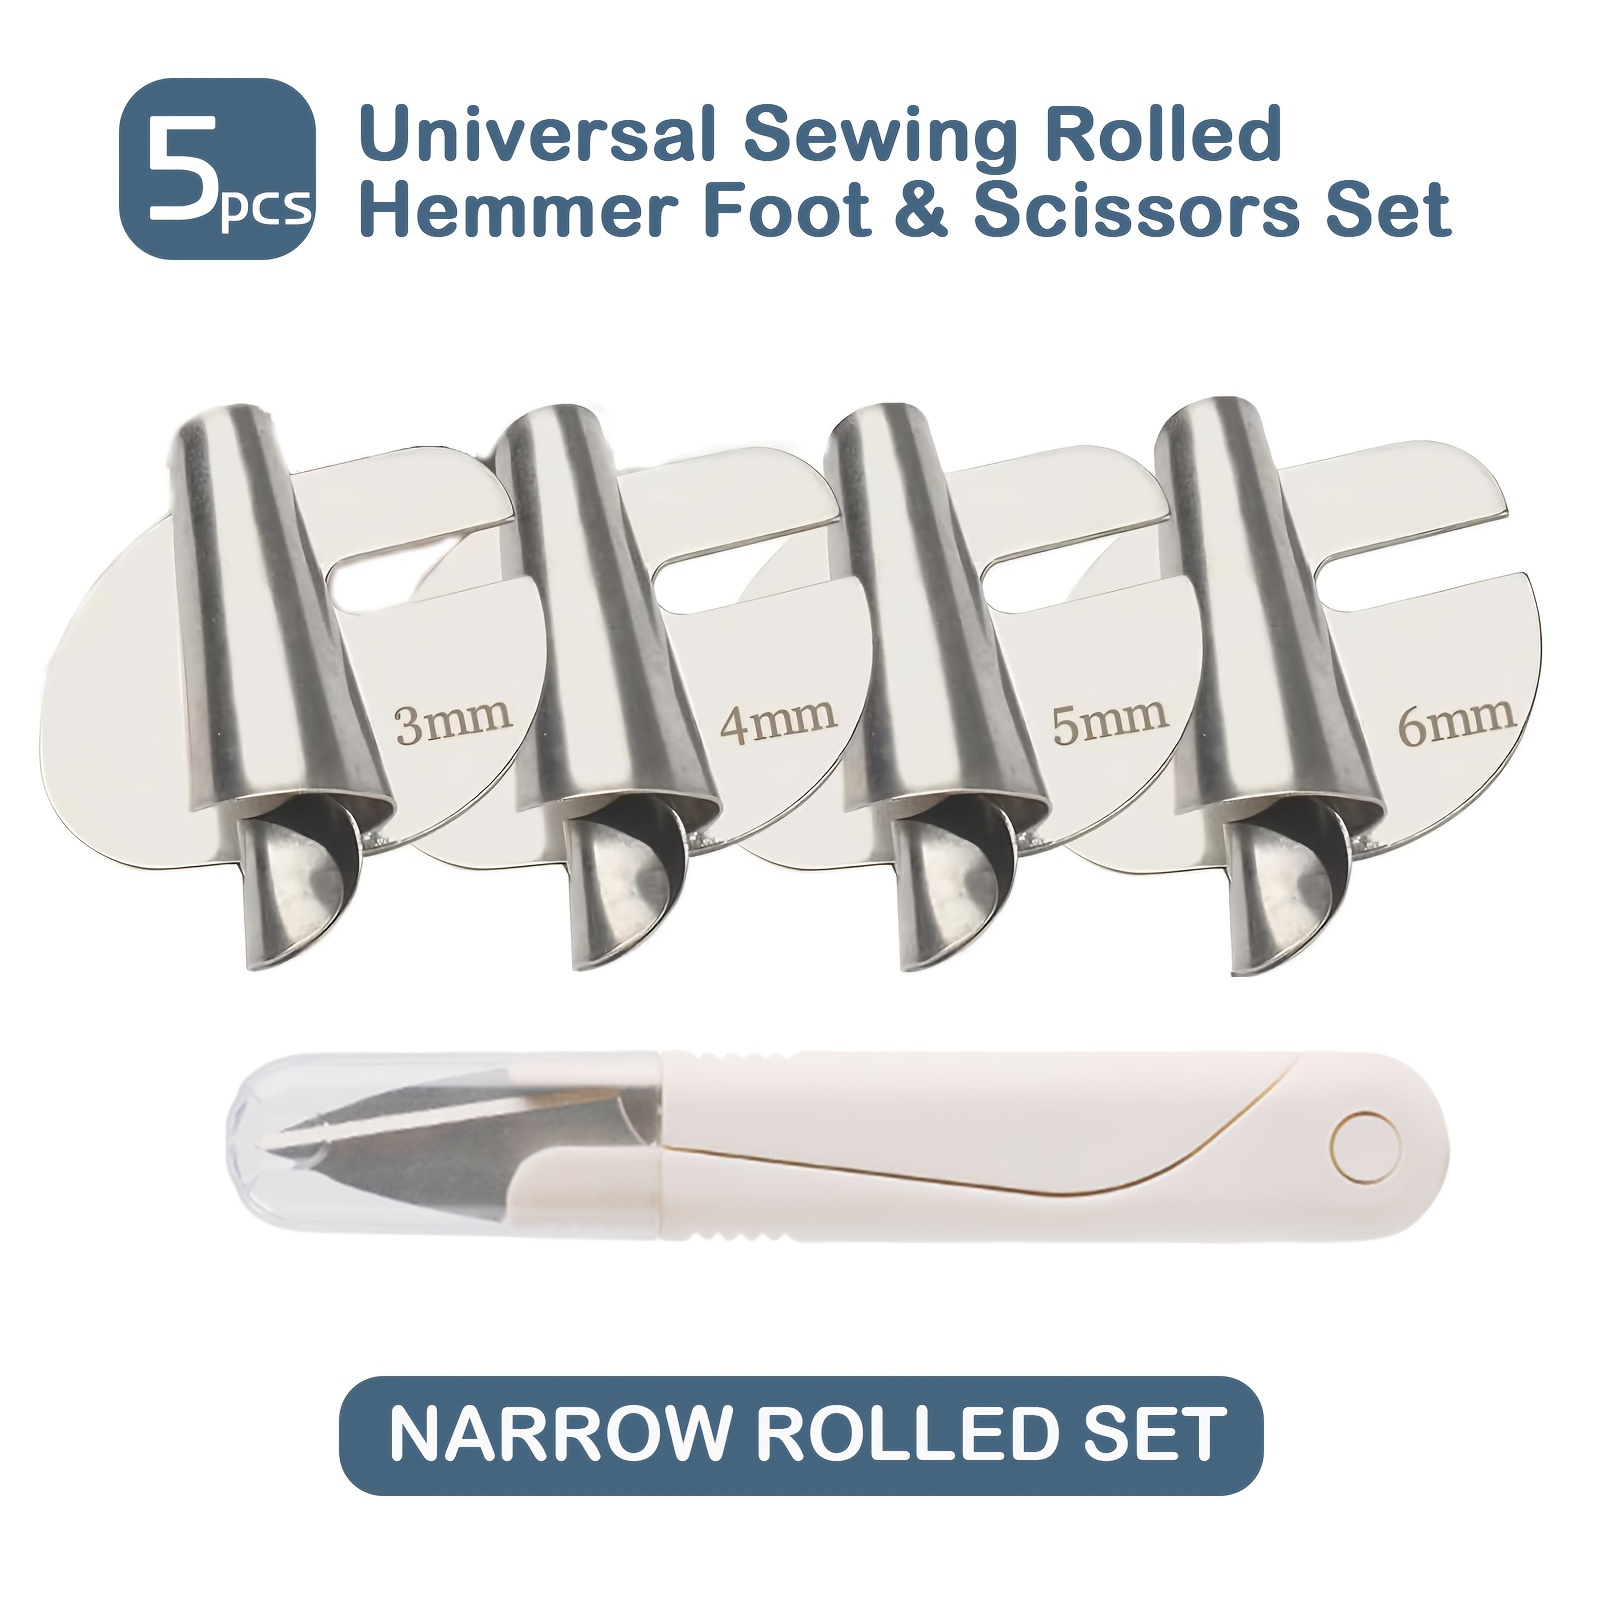 Narrow Rolled Hem Foot 3mm - Universal for 7mm / 5mm Sewing Machines